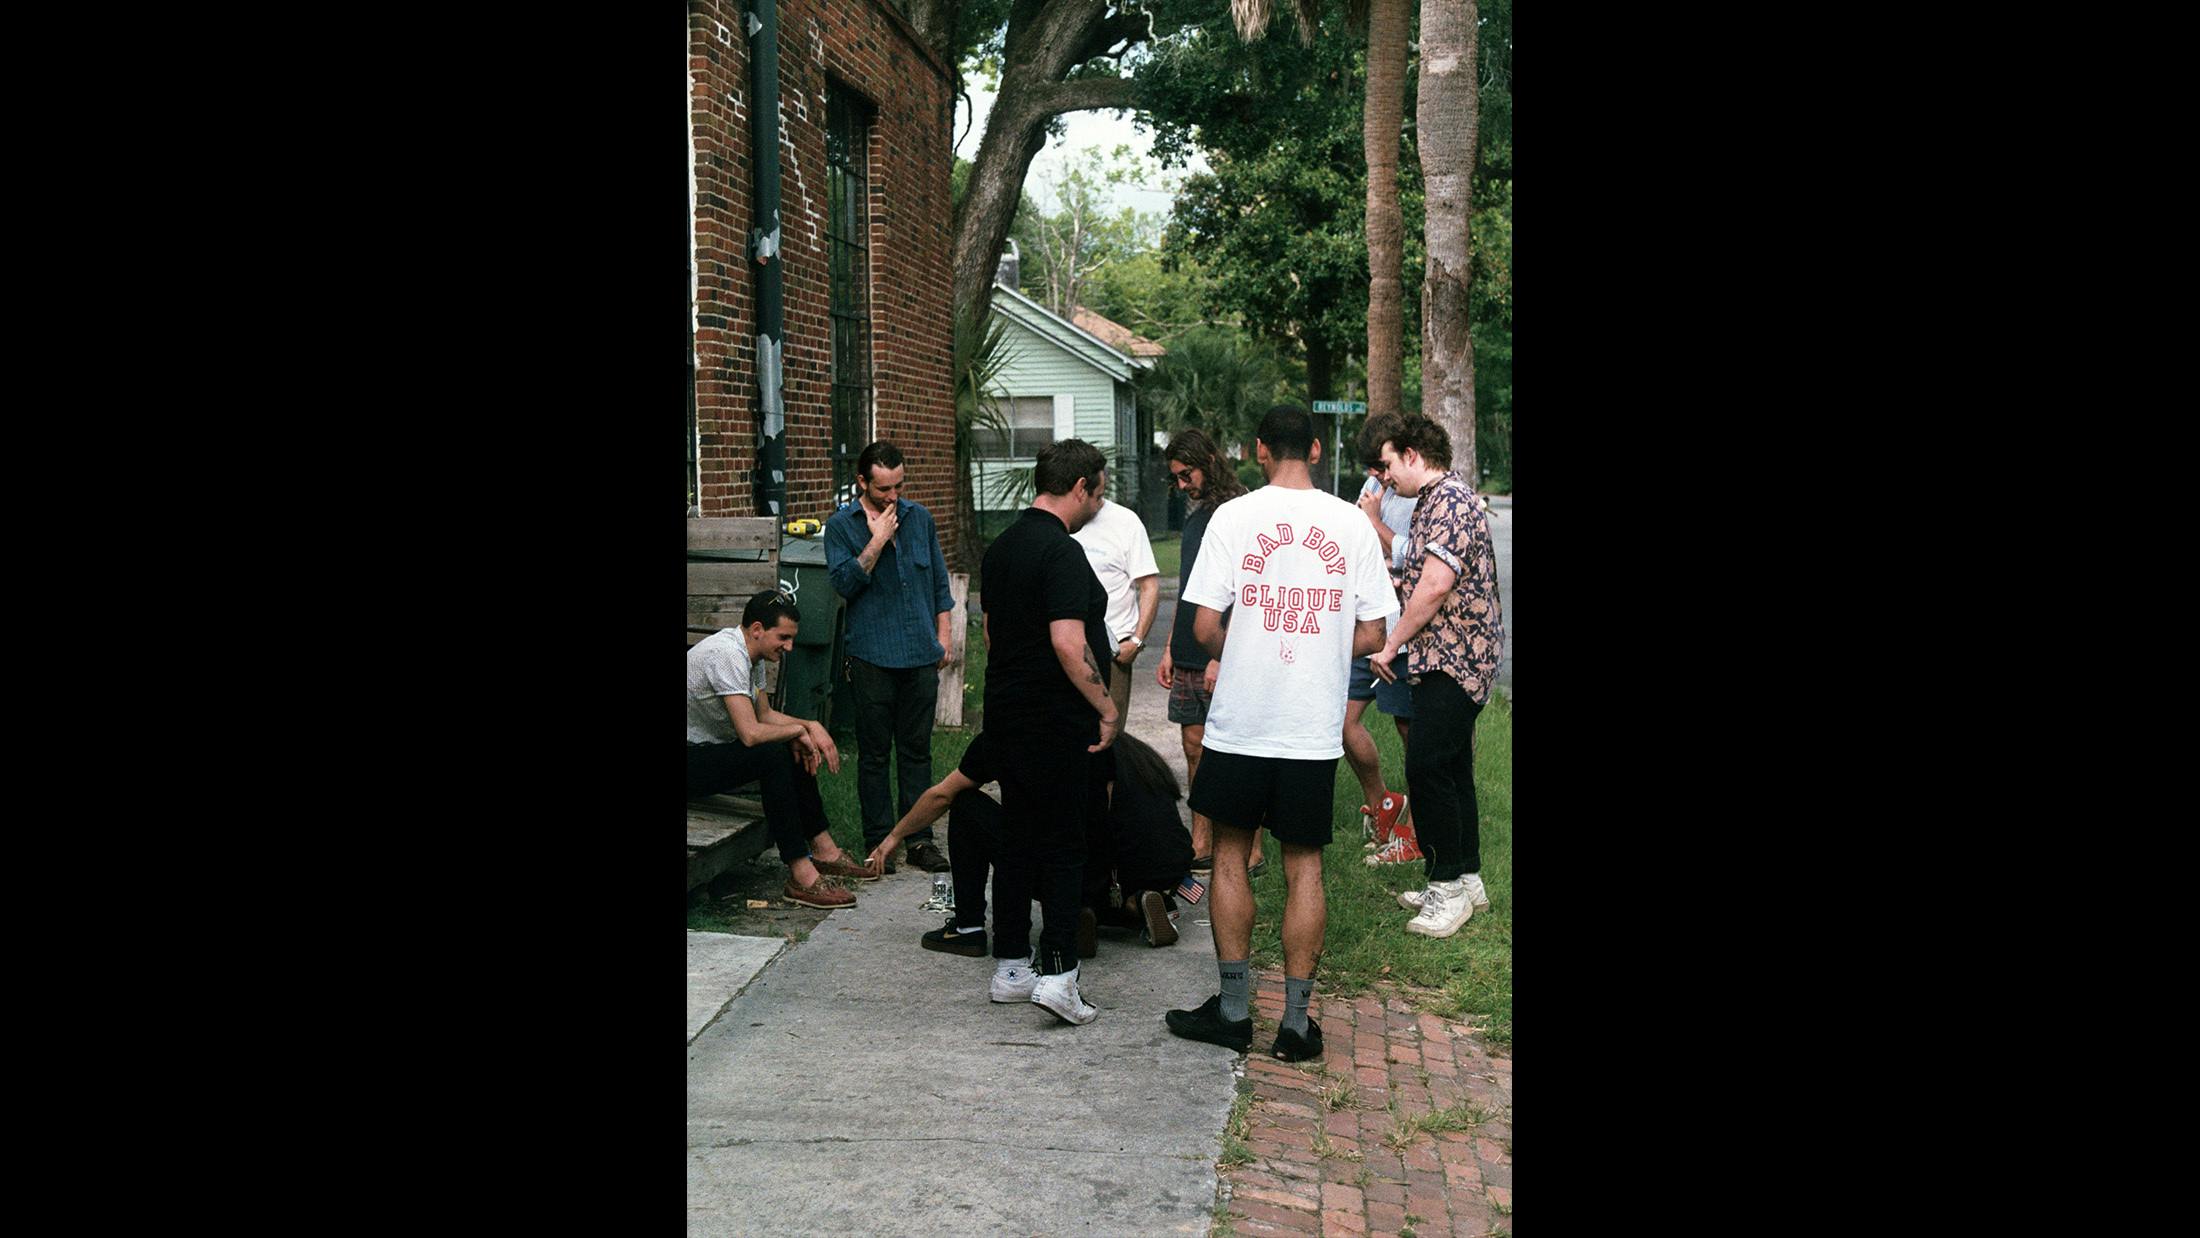 It was 4th of July and we were in Savannah, Georgia. This was supposed to be a day off from our tour with Nothing (Philly), but a nice dude who ran the label Graveface Records, hit us up to see if we'd like to play his warehouse. It was so extremely humid there, we felt disgusting all day. This local band called KEWL opened the show and all their friends were rad as fuck. We were standing around drinking beers and the next thing you know, someone busts out the dice and you end up winning a little money, or losing… I lost.